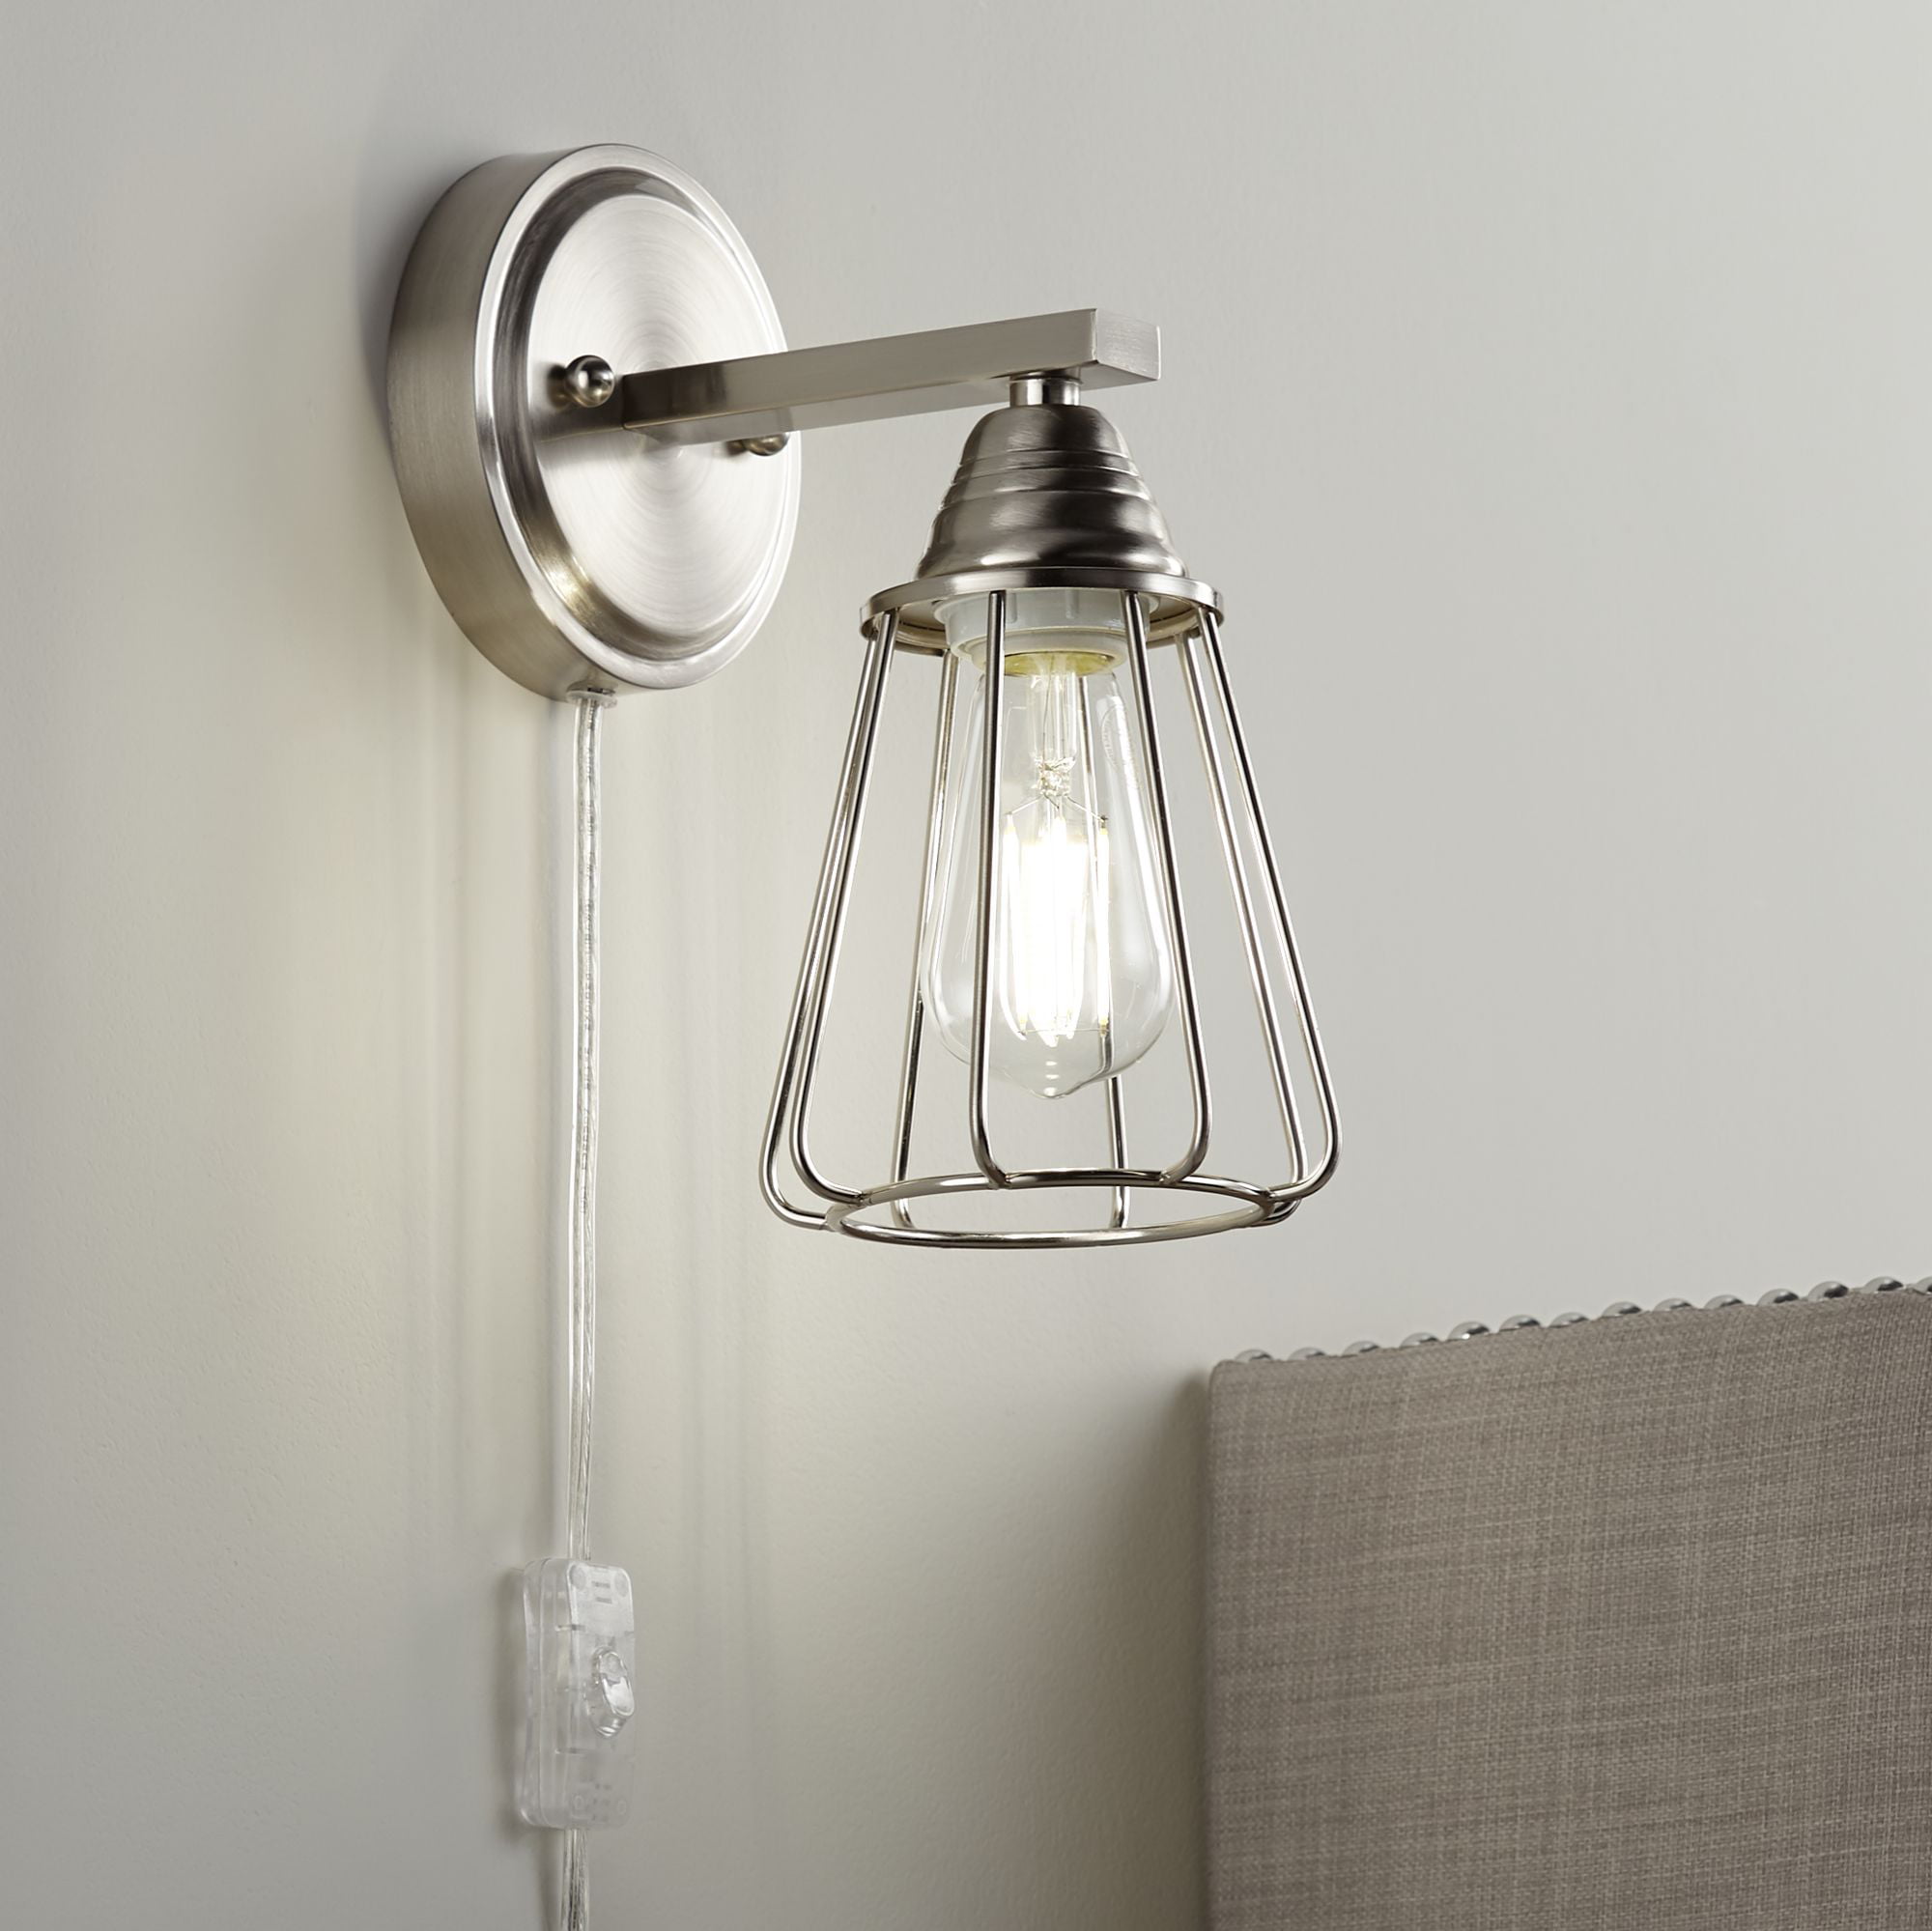 Details about   Kingmi Wire Cage Industrial Wall Sconce Plug-in Wall Light Shade Vintage Style 2 